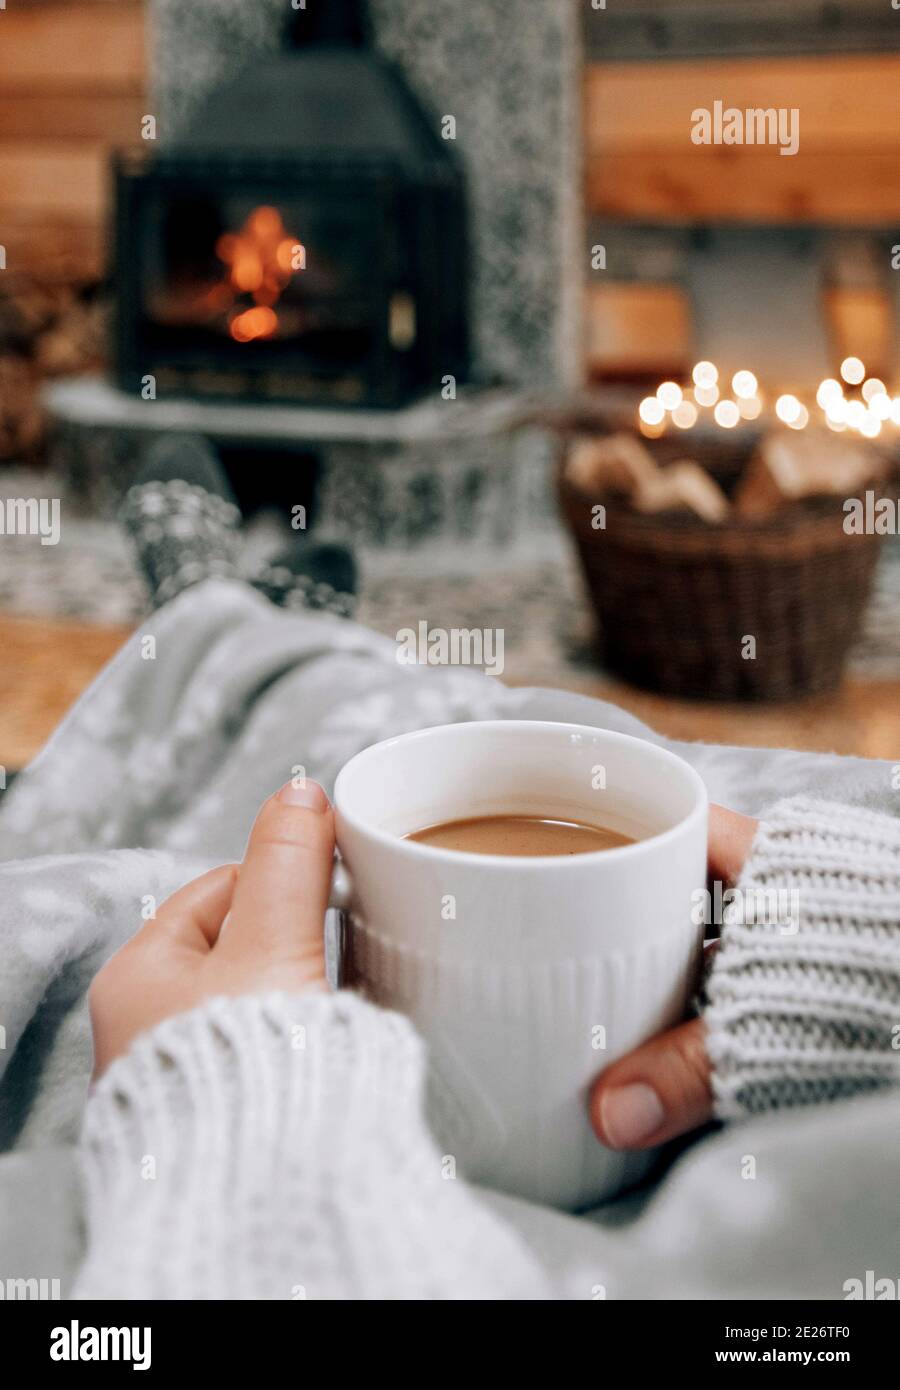 Shallow focus shot of hands holdings a mug of coffee on fireplace background Stock Photo